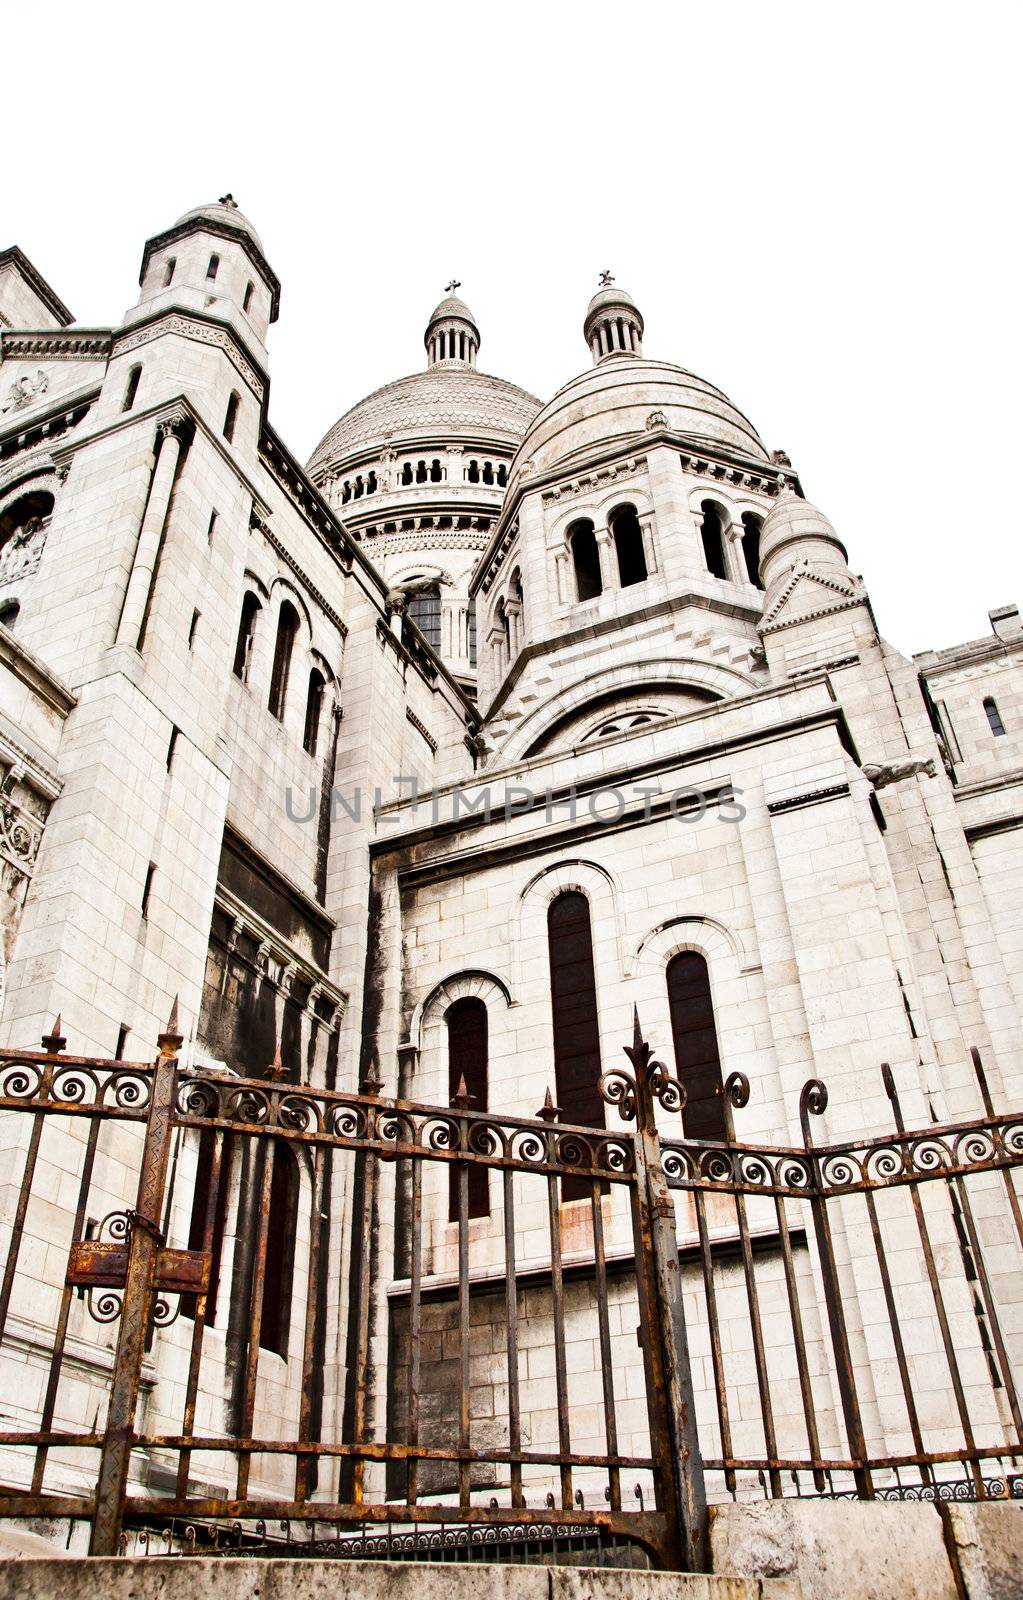 Detail of the Basilica of the Sacred Heart of Paris, commonly known as Sacré-Cœur Basilica, dedicated to the Sacred Heart of Jesus, in Paris, France